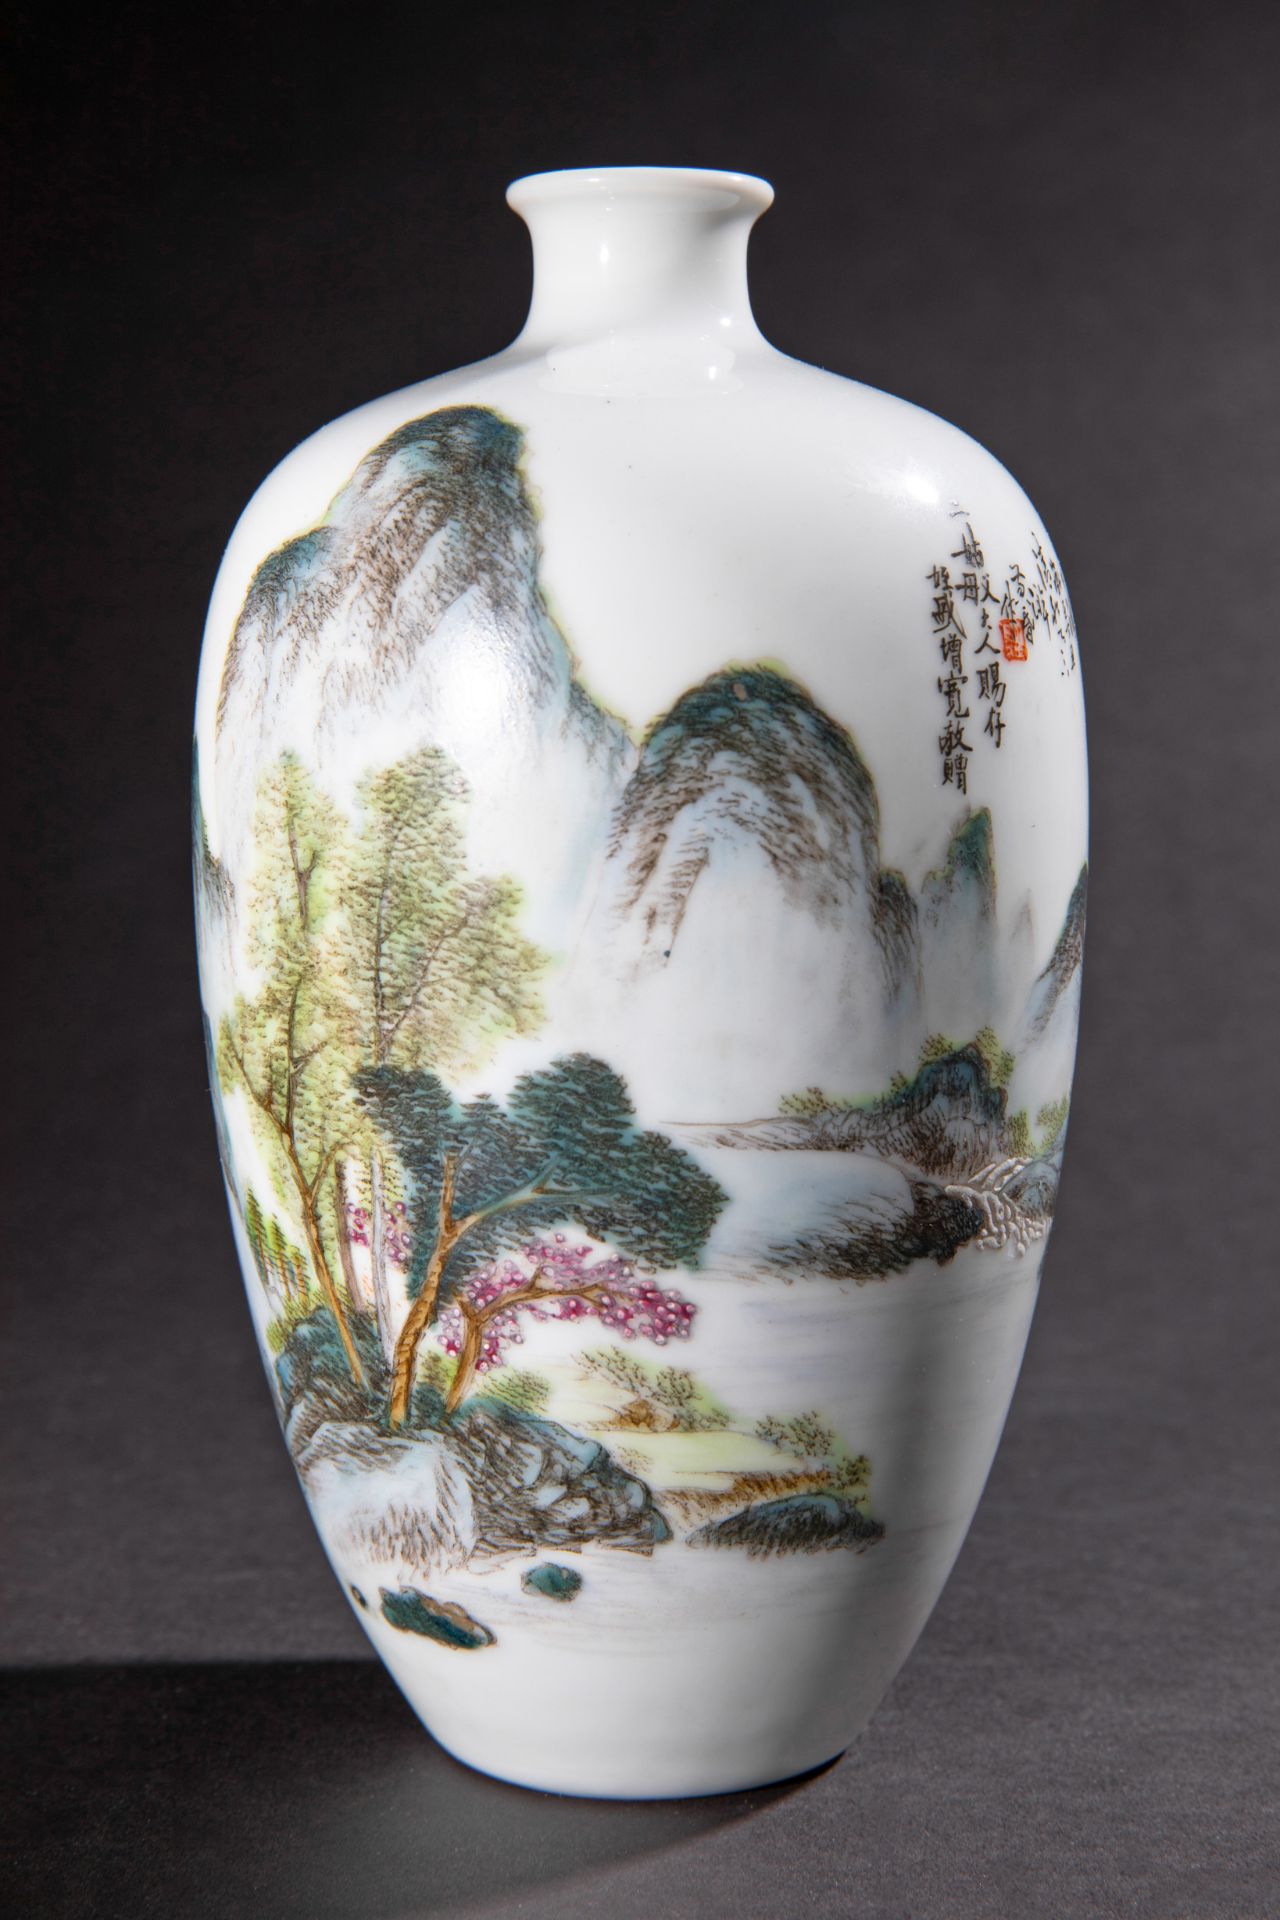 Vase with landscape and characters, China, Wang Xiaoting, Republic Time, 1900-1949